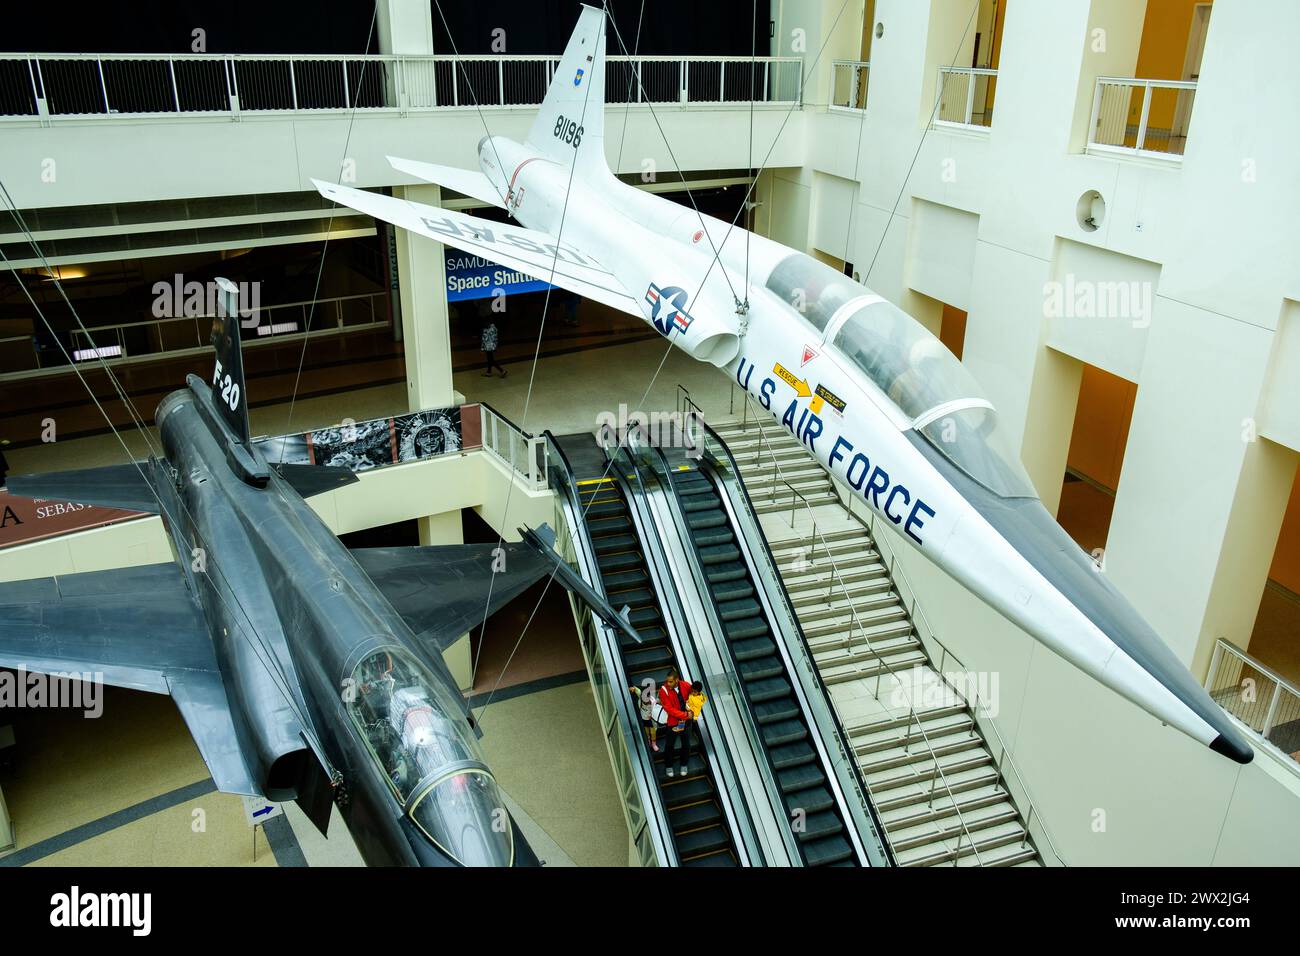 Northrop T-38 Talon (white), first twin-engine, high-altitude supersonic jet trainer, seen at the California Science Center, Los Angeles, California. Stock Photo